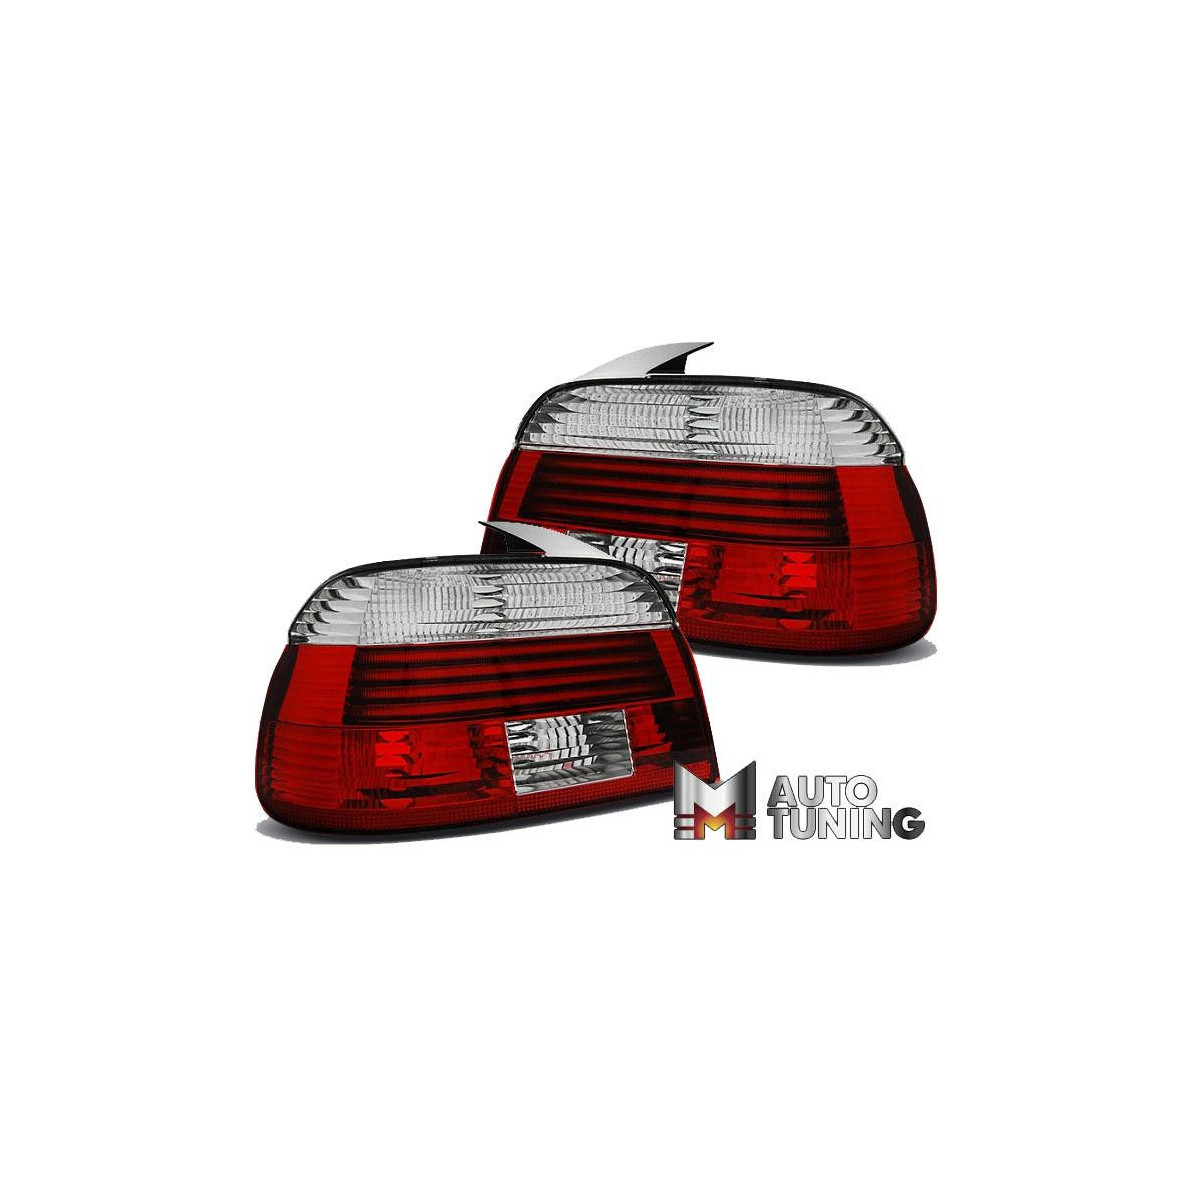 LAMPY BMW E39 09.00-06.03 RED WHITE LED